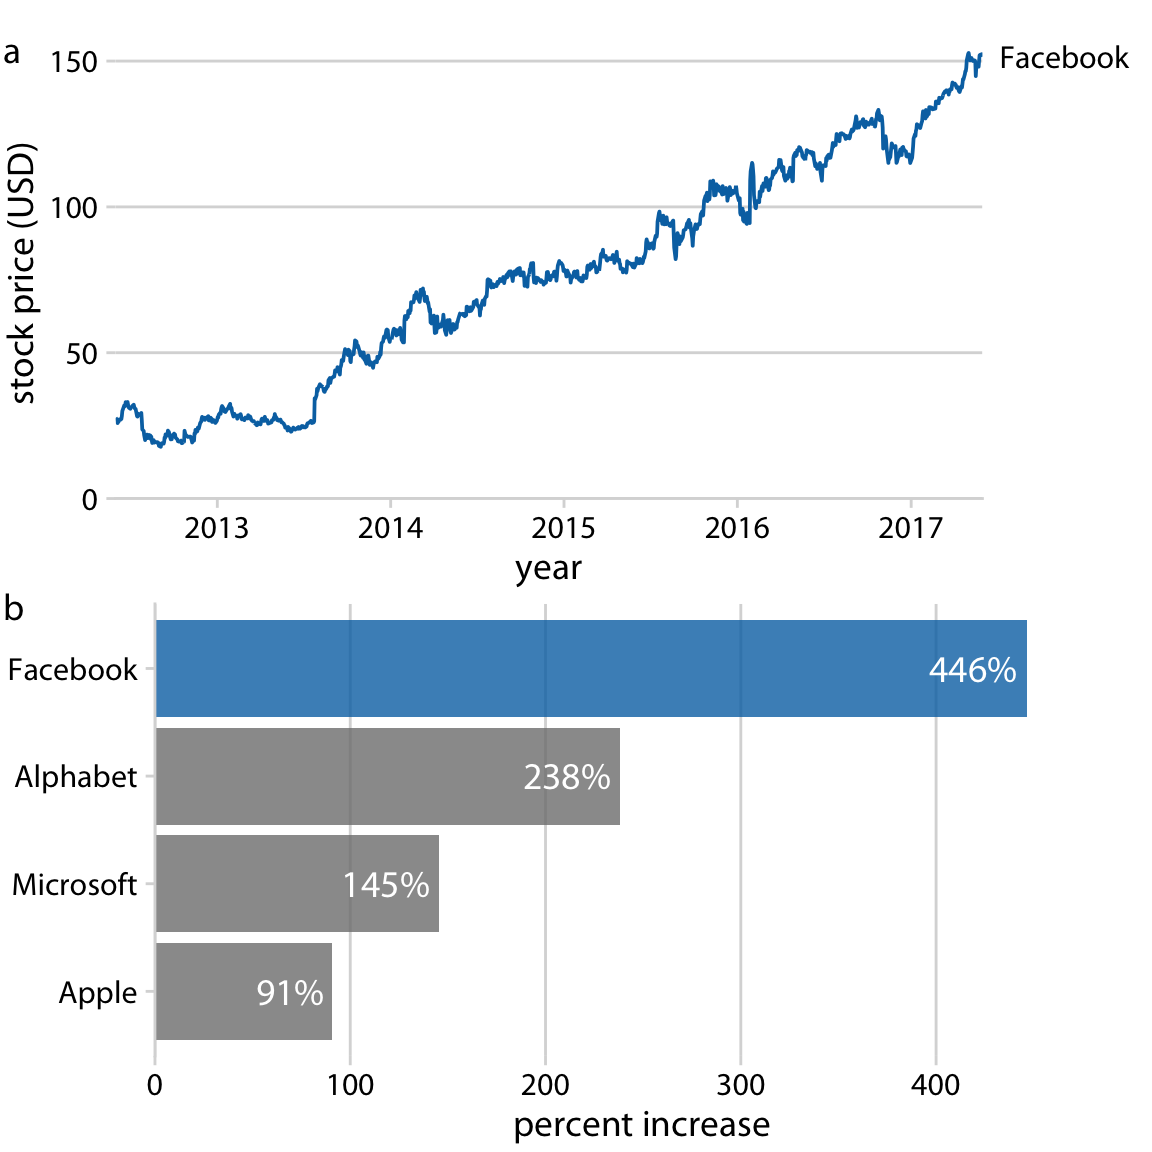 Growth of Facebook stock price over a five-year interval and comparison with other tech stocks. (a) The Facebook stock price rose from around $25/share in mid-2012 to $150/share in mid-2017, an increase of almost 450%. (b) The prices of other large tech companies did not rise comparably over the same time period. Price increases ranged from 90% to 240%. Data source: Yahoo Finance